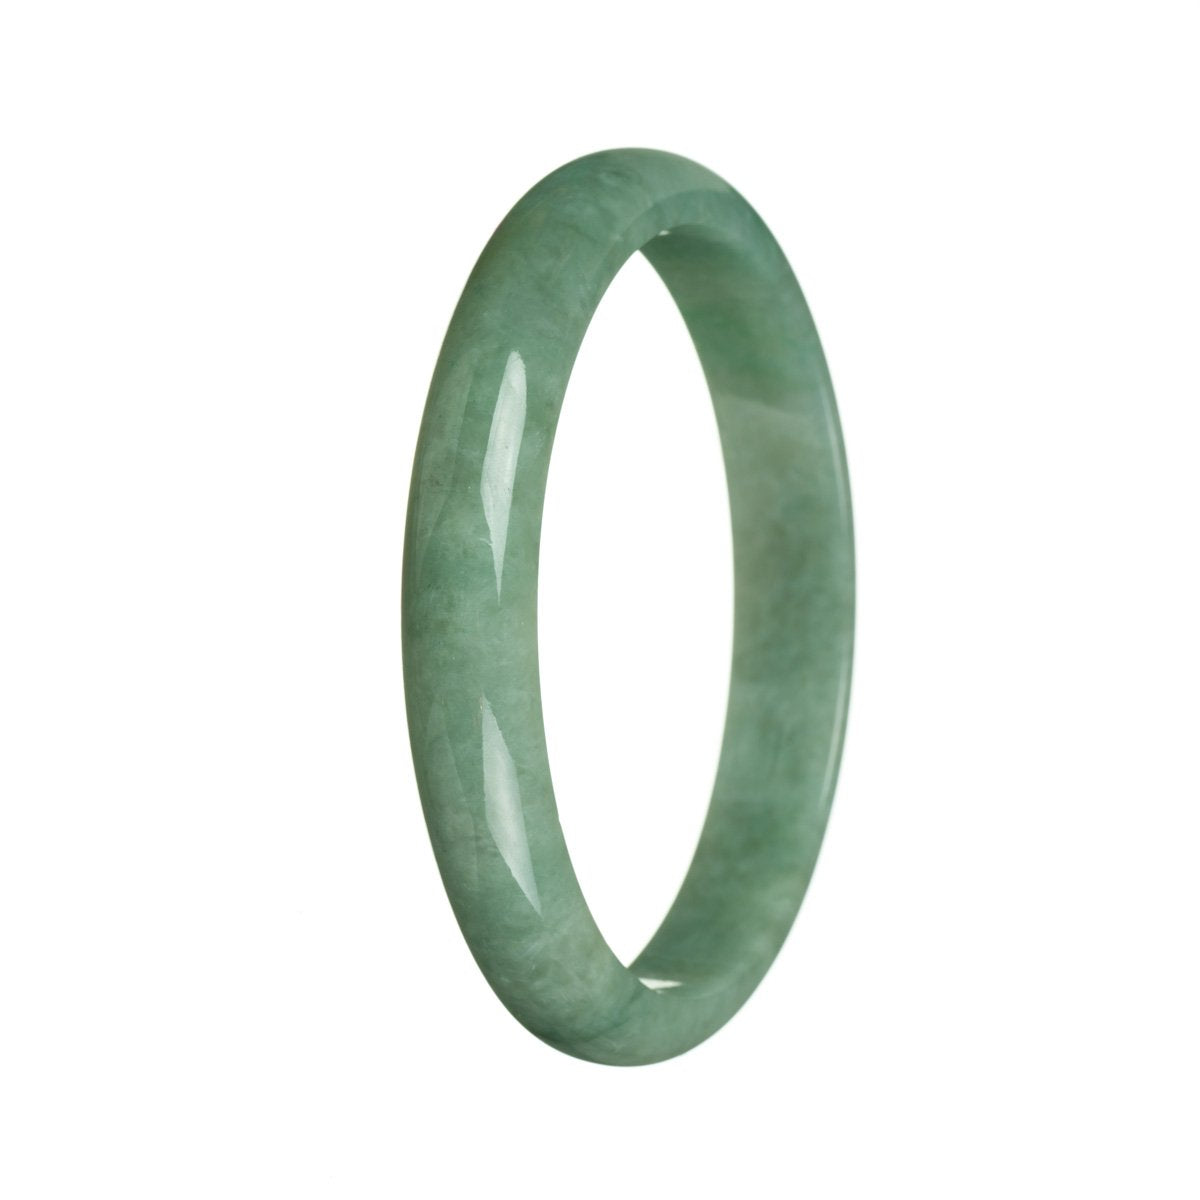 A close-up image of a half moon-shaped, certified Grade A green jade bangle bracelet. The bracelet is smooth and polished, showcasing the natural beauty of the jade. The 77mm size indicates its circumference, making it a medium-sized bracelet. The brand name "MAYS™" is also mentioned.